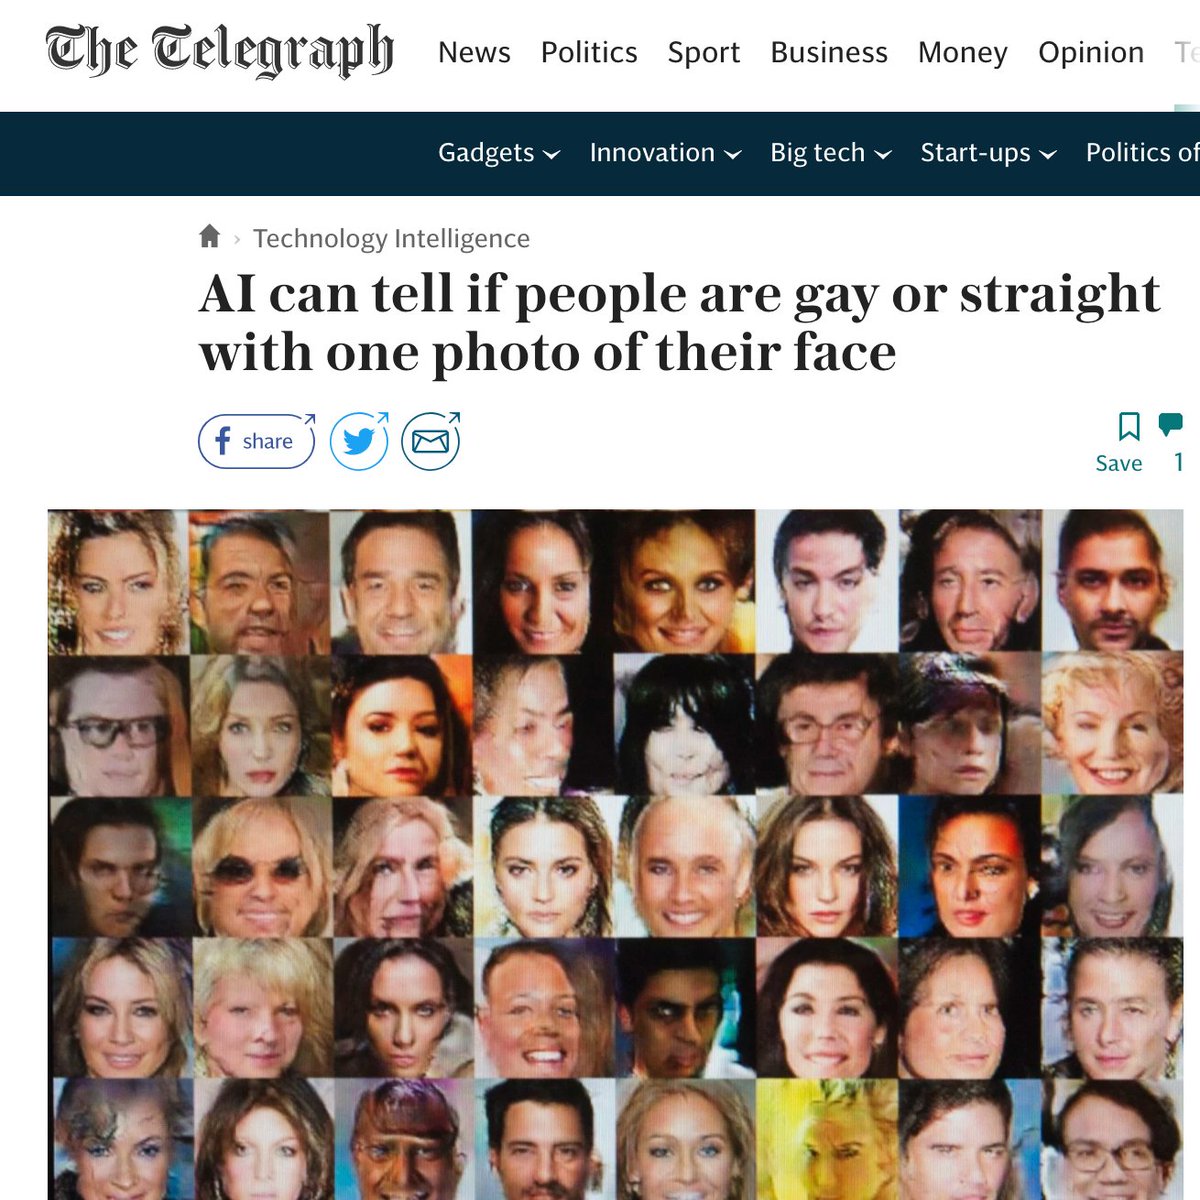 Let's start with a story. Remember this one from last year? An algorithm that can tell if you're gay or straight from a single photo. It's a prospect that is both awesome and terrifying. 2/8 https://www.telegraph.co.uk/technology/2017/09/08/ai-can-tell-people-gay-straight-one-photo-face/